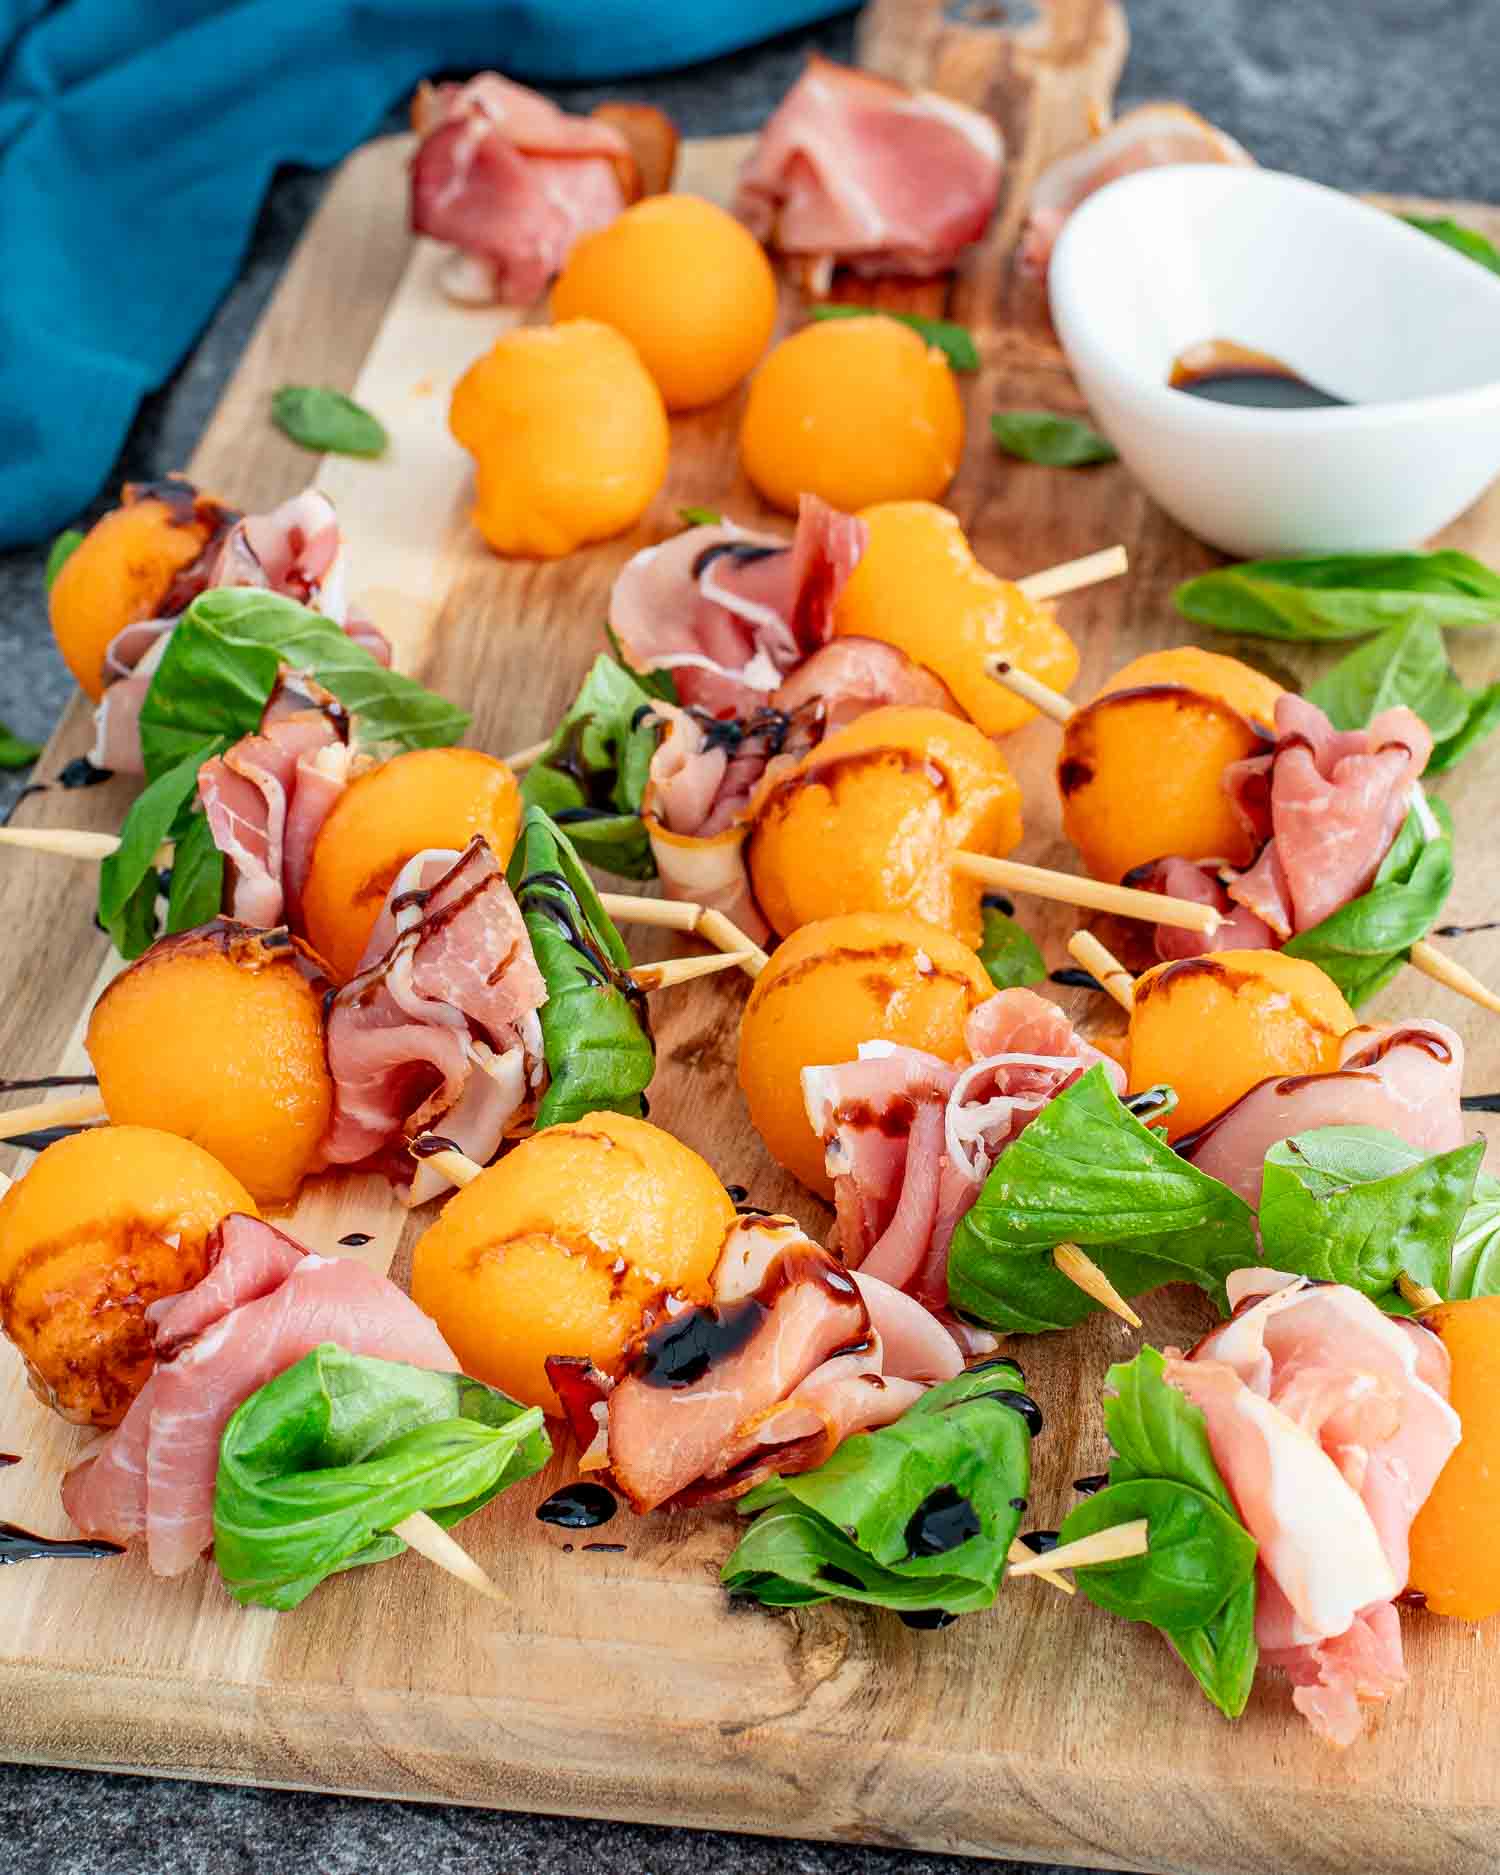 melon prosciutto skewers with balsamic glaze on a cutting board.